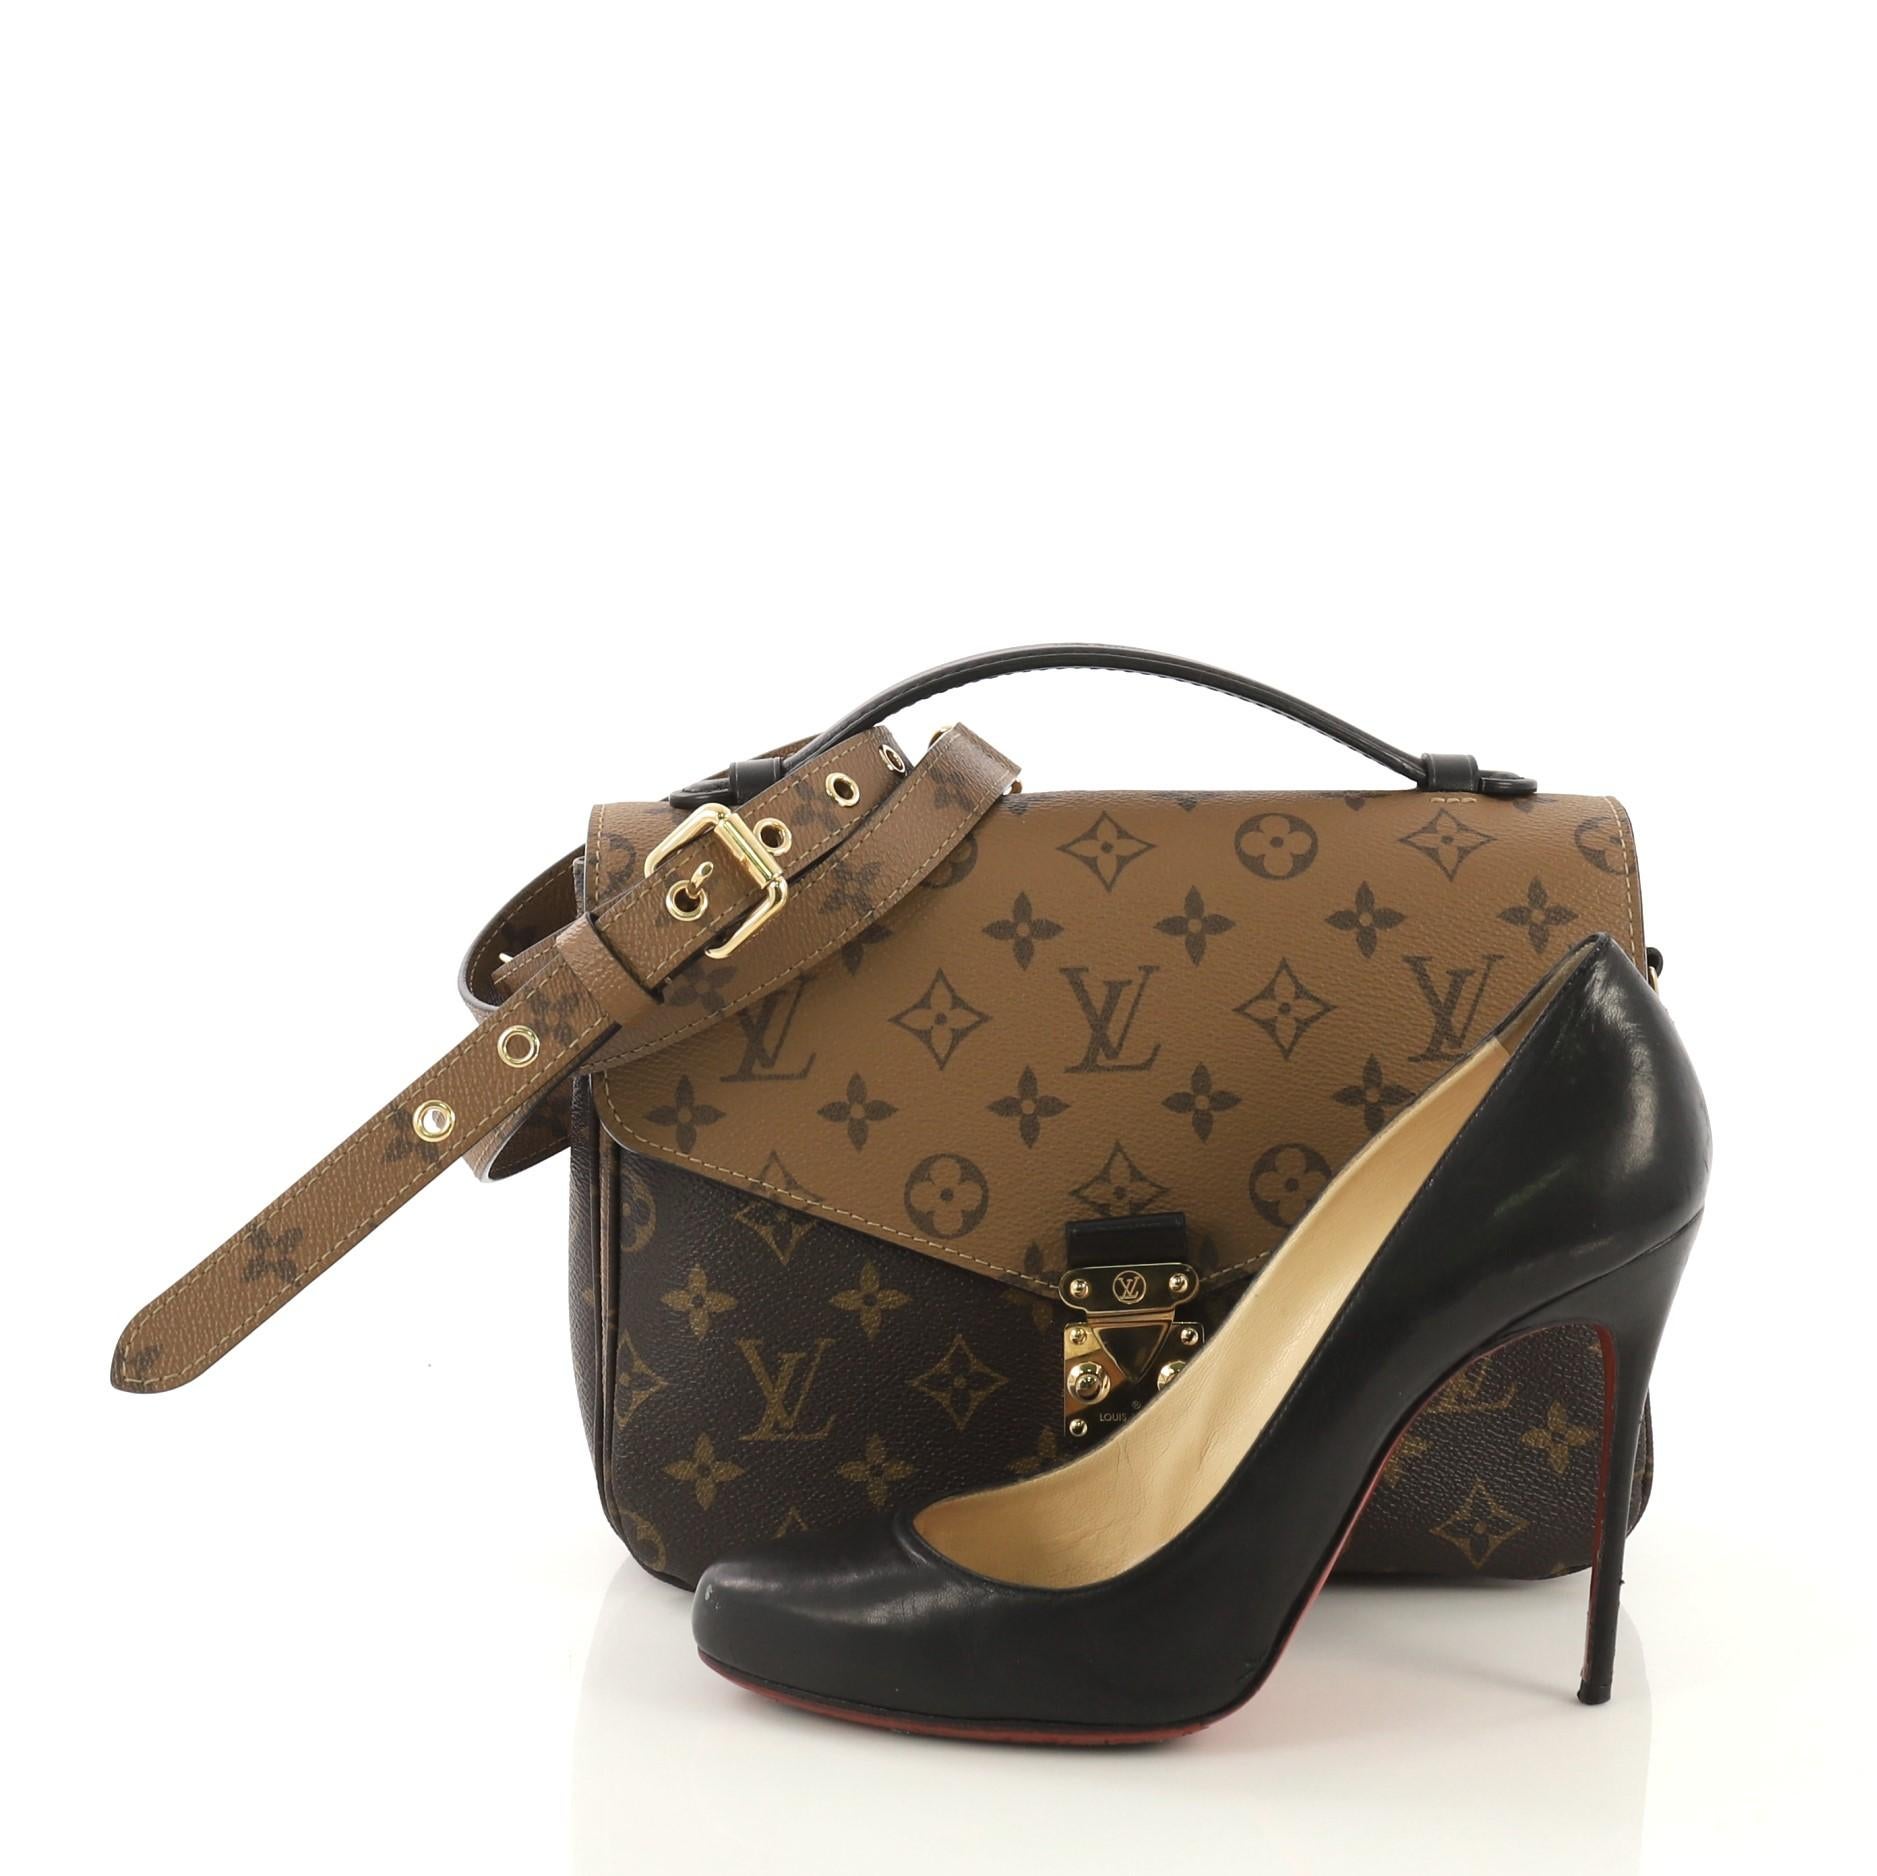 This Louis Vuitton Pochette Metis Reverse Monogram Canvas, crafted from brown reverse monogram coated canvas, features a top leather handle, exterior back zip pocket, and gold-tone hardware. Its s-lock closure opens to a black microfiber interior